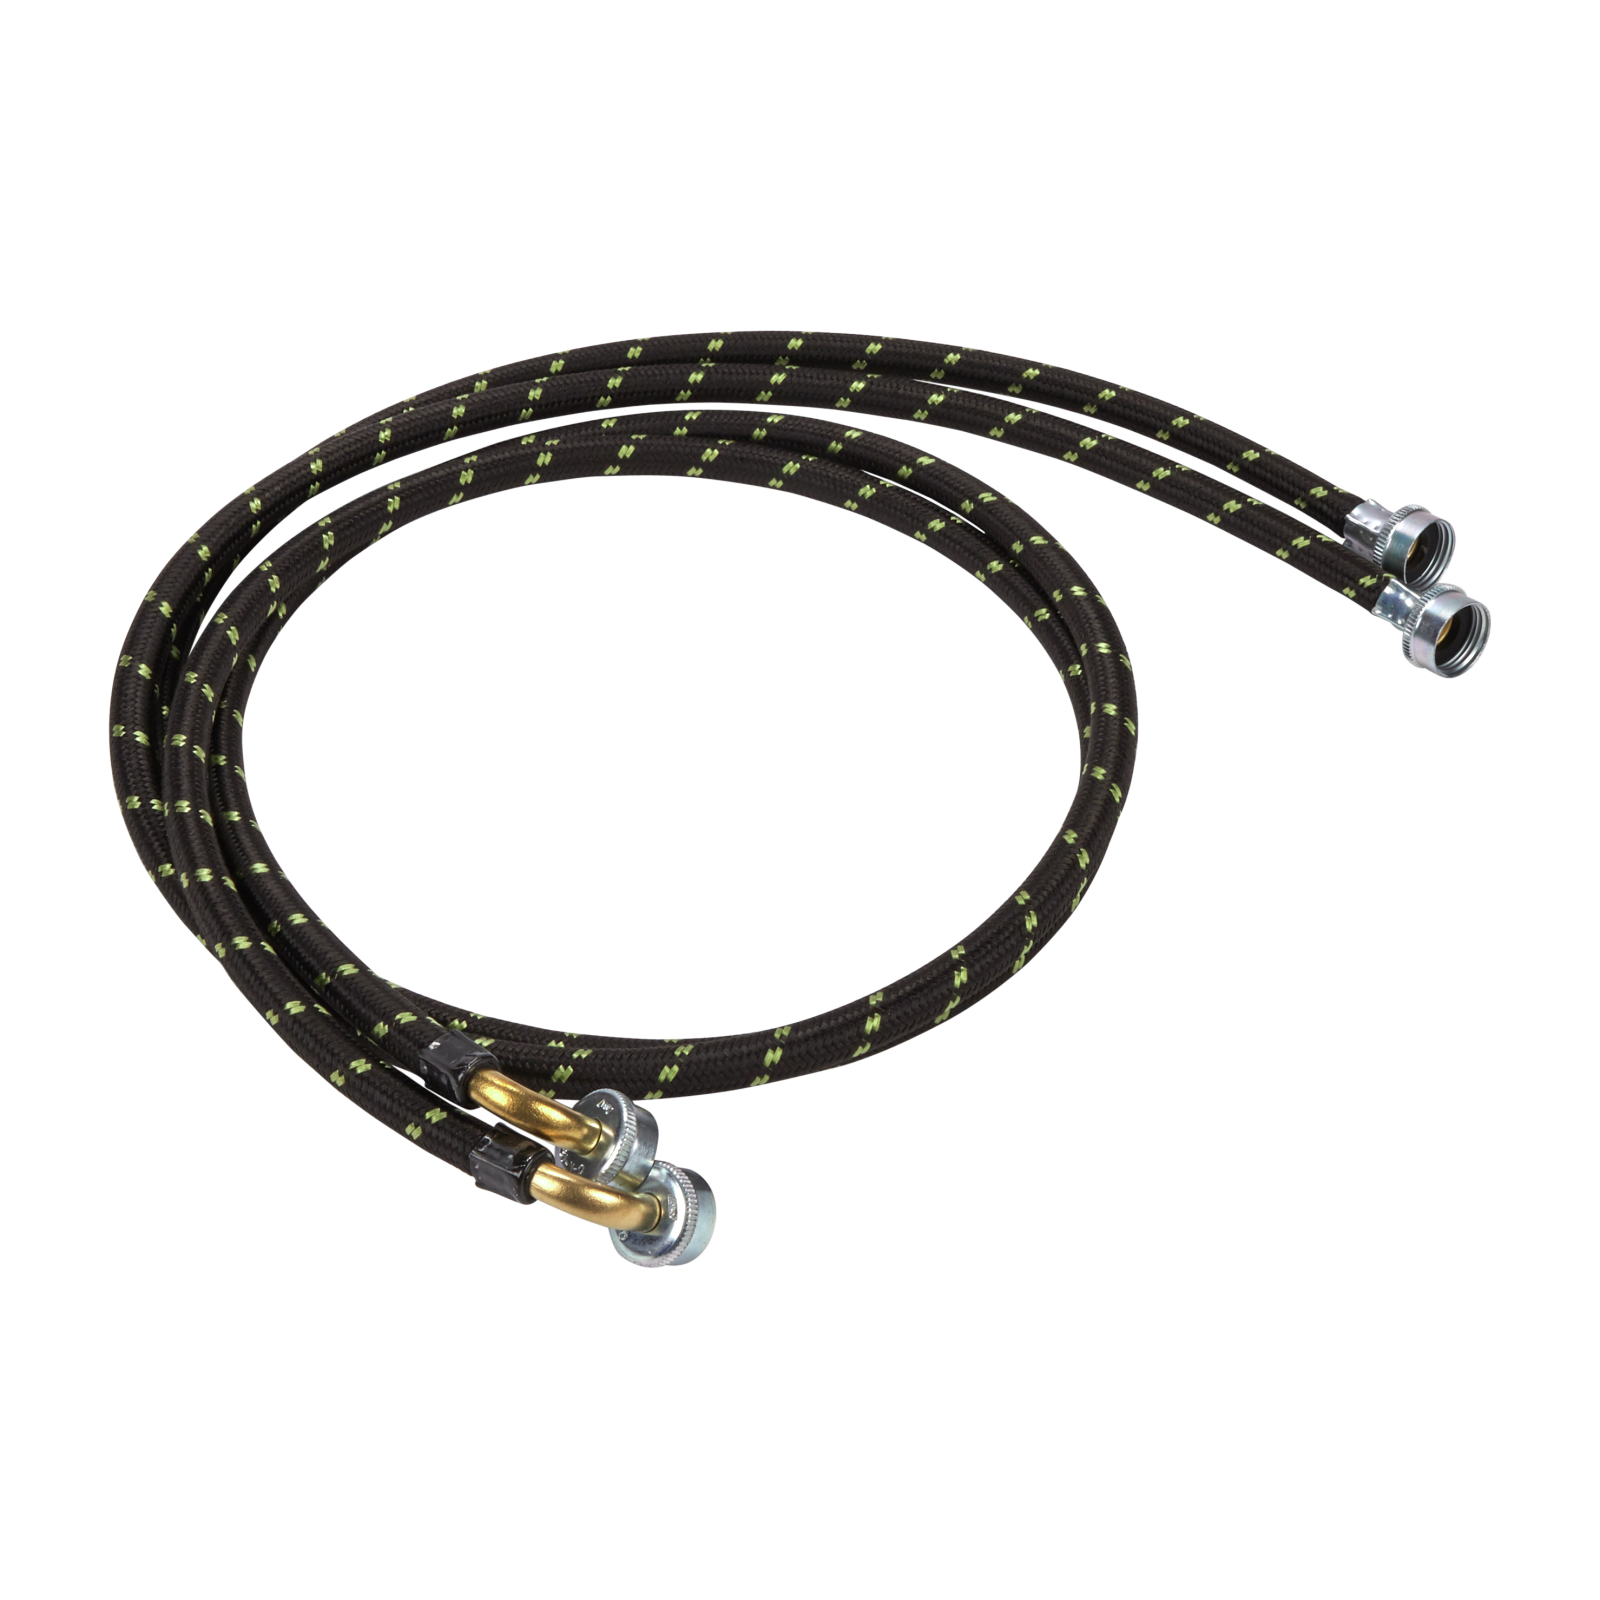 Whirlpool - Washer Fill Hoses in Black - 8212638RP